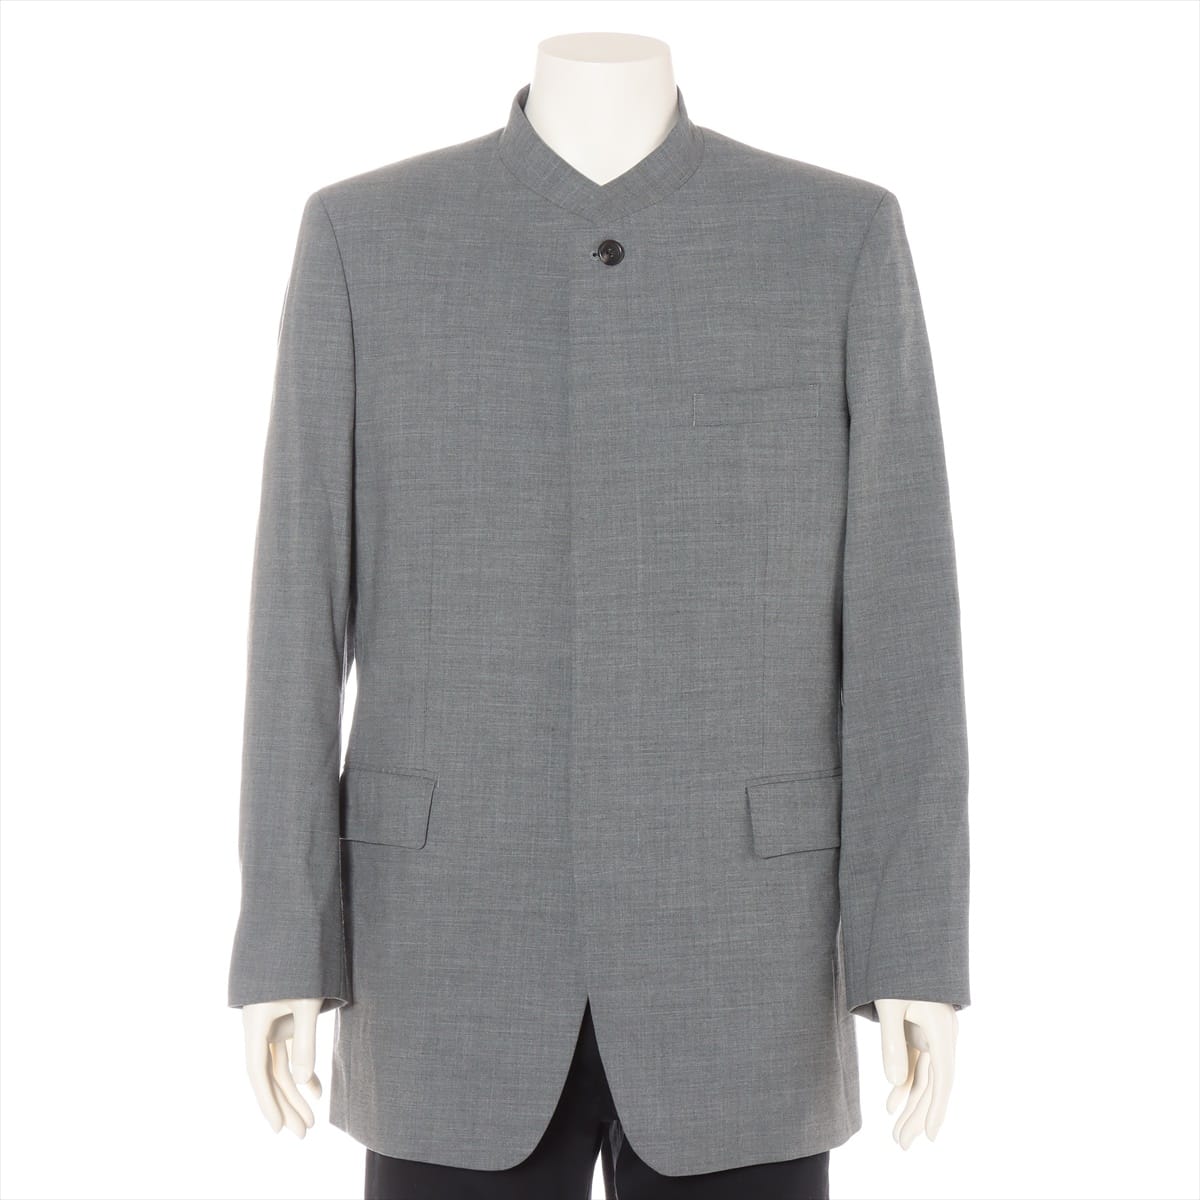 Issey Miyakemen Hair Suit jacket 8 Men's Grey  Mao color Comes with shoulder pads